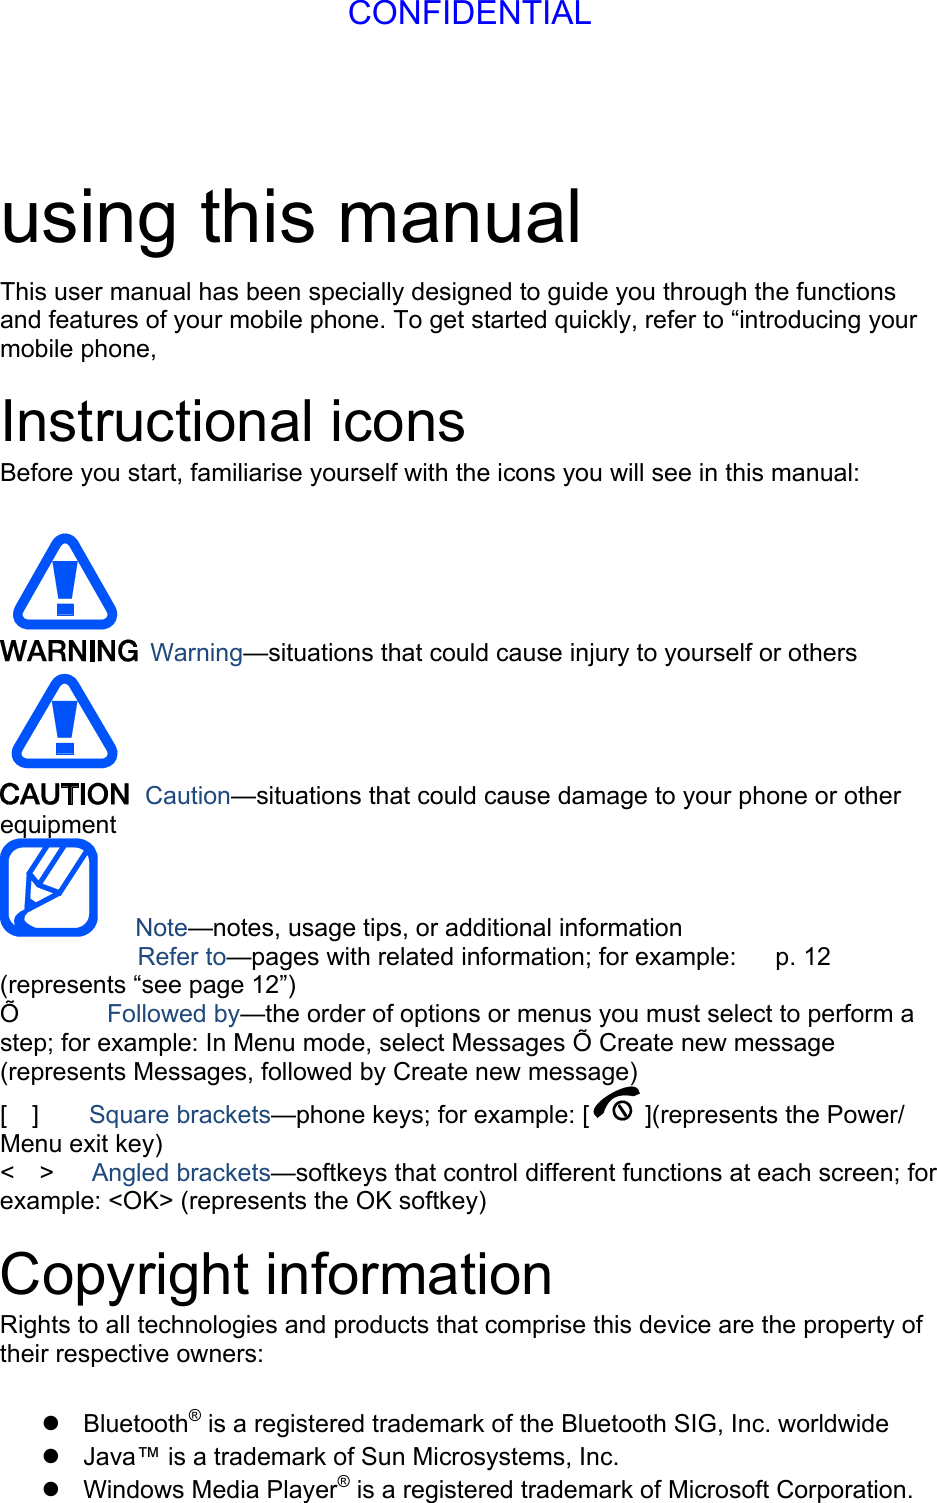 using this manual This user manual has been specially designed to guide you through the functions and features of your mobile phone. To get started quickly, refer to “introducing your mobile phone,  Instructional icons Before you start, familiarise yourself with the icons you will see in this manual:     Warning—situations that could cause injury to yourself or others  Caution—situations that could cause damage to your phone or other equipment    Note—notes, usage tips, or additional information   　       Refer to—pages with related information; for example:   p. 12 　(represents “see page 12”) Õ       Followed by—the order of options or menus you must select to perform a step; for example: In Menu mode, select Messages Õ Create new message (represents Messages, followed by Create new message) [  ]    Square brackets—phone keys; for example: [ ](represents the Power/ Menu exit key) &lt;  &gt;   Angled brackets—softkeys that control different functions at each screen; for example: &lt;OK&gt; (represents the OK softkey)  Copyright information Rights to all technologies and products that comprise this device are the property of their respective owners:   Bluetooth® is a registered trademark of the Bluetooth SIG, Inc. worldwide   Java™ is a trademark of Sun Microsystems, Inc.  Windows Media Player® is a registered trademark of Microsoft Corporation.  CONFIDENTIAL